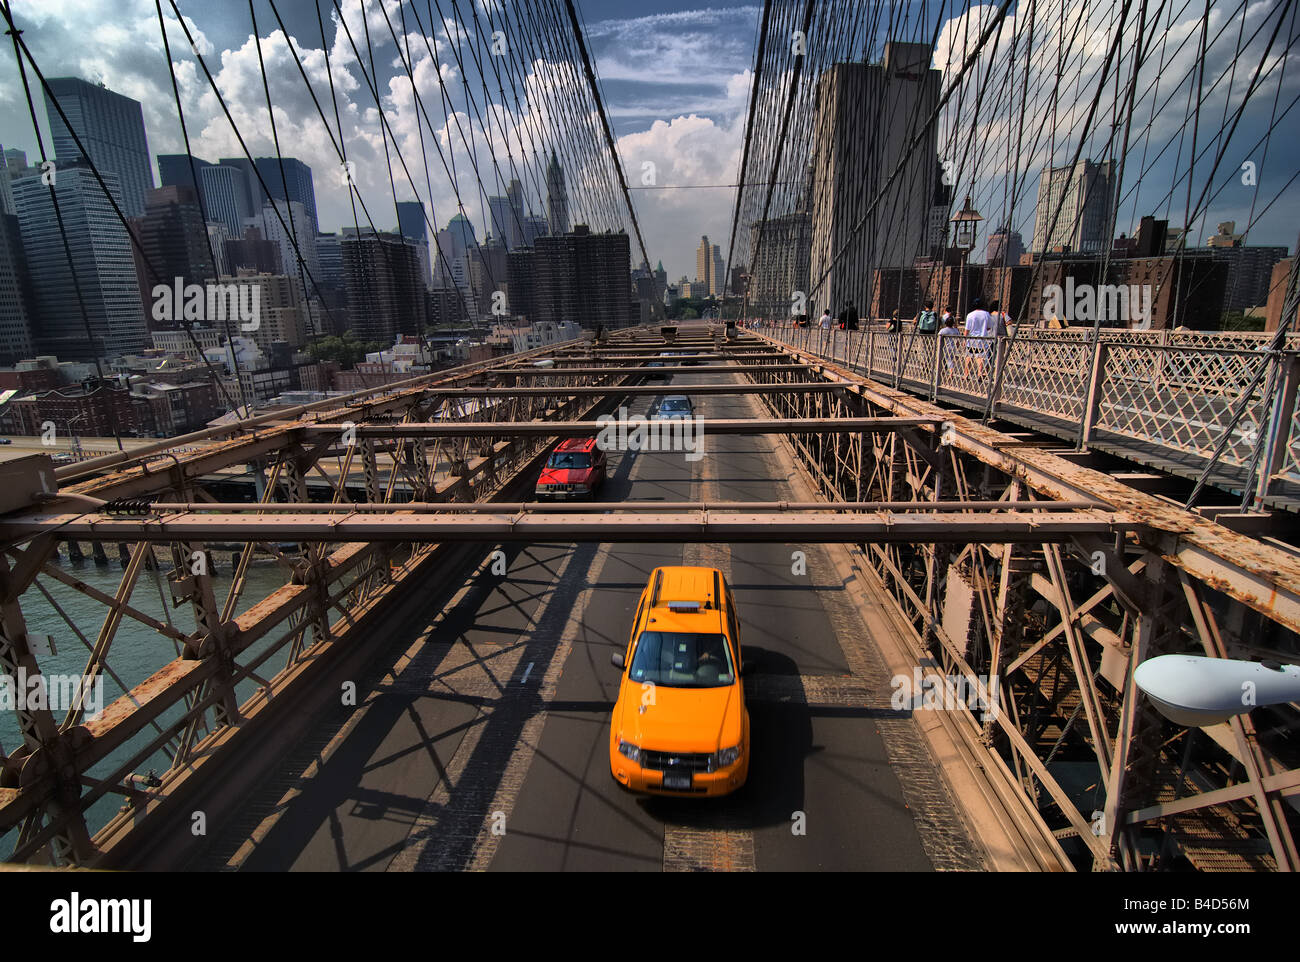 A taxi is among the traffic crossing the Brooklyn Bridge.  Pedestrians can also be seen on the upper walkway. Stock Photo